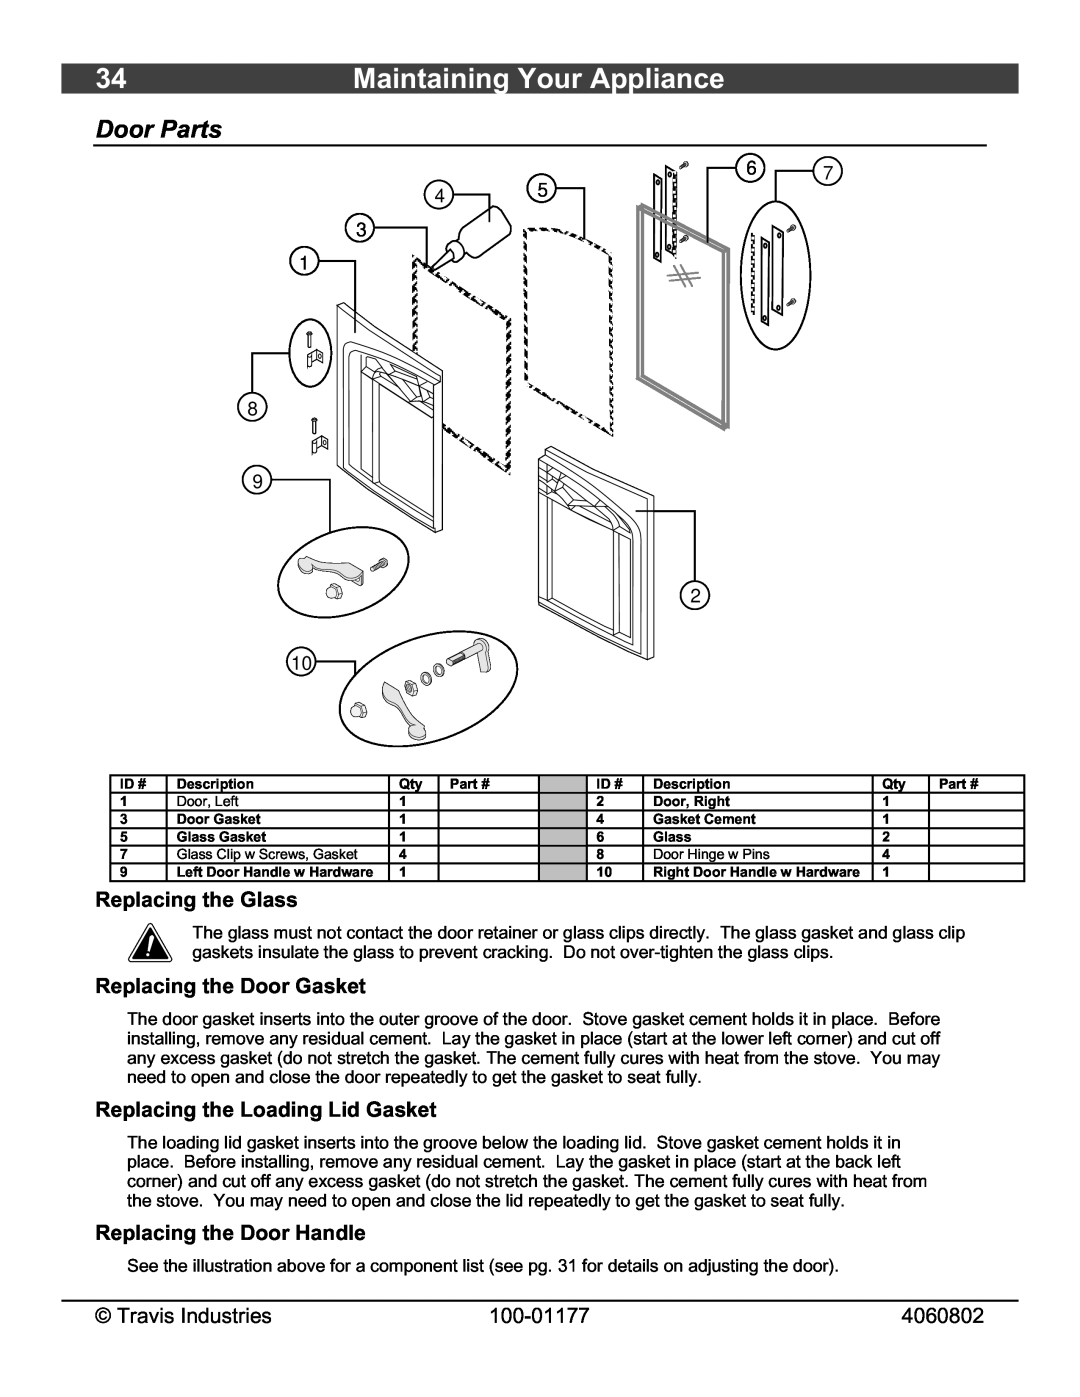 Lopi 028-S-75-2 Maintaining Your Appliance, Replacing the Glass, Replacing the Door Gasket, Replacing the Door Handle 